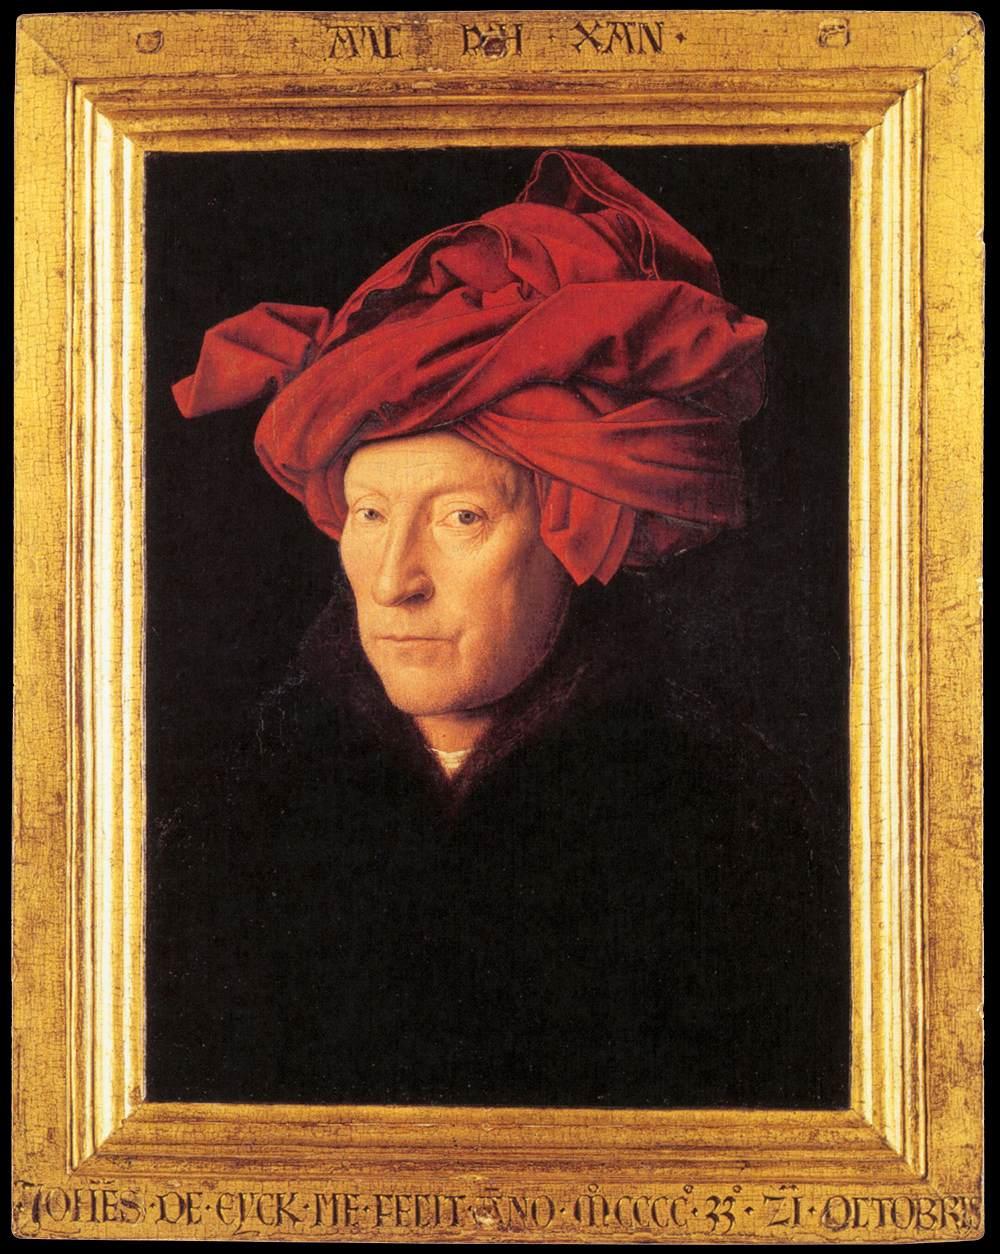 Jan van Eyck, Man in a Red Turban, 1433, oil on wood panel, 13 x 10 inches, The National Gallery, London.